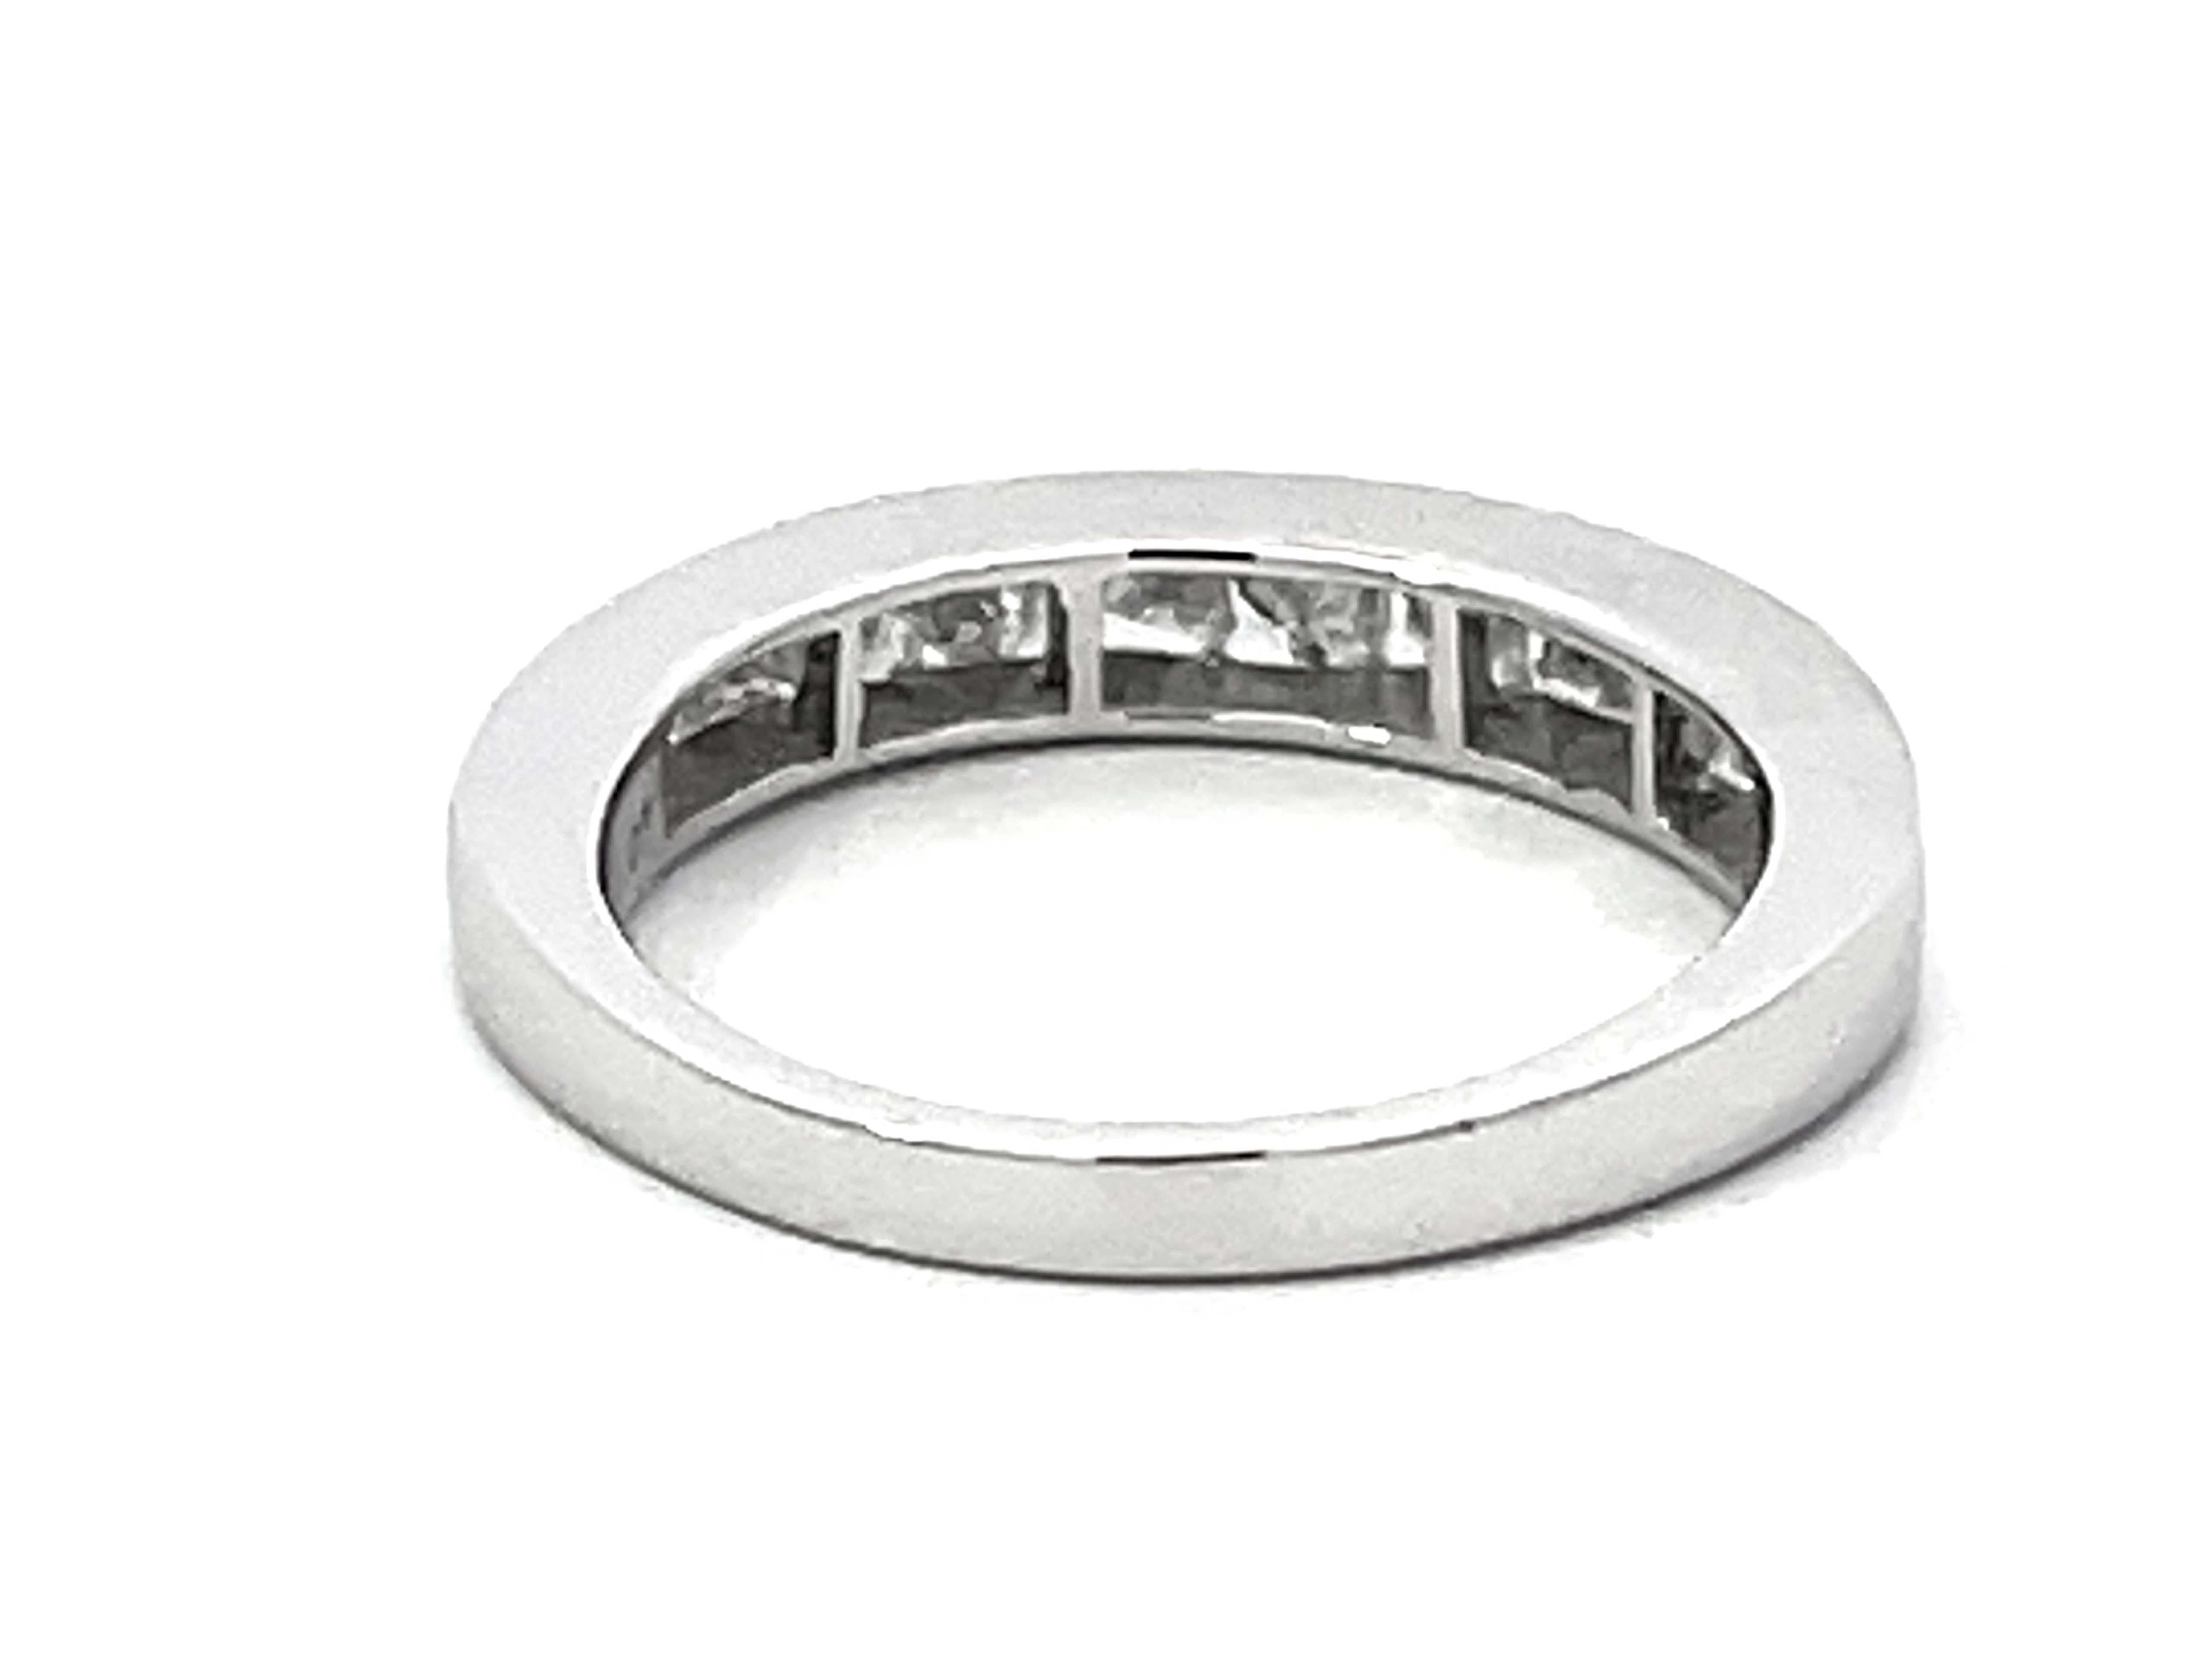 1.07 Carat Princess Cut Channel Set Diamond Band Ring Solid 18k White Gold For Sale 2